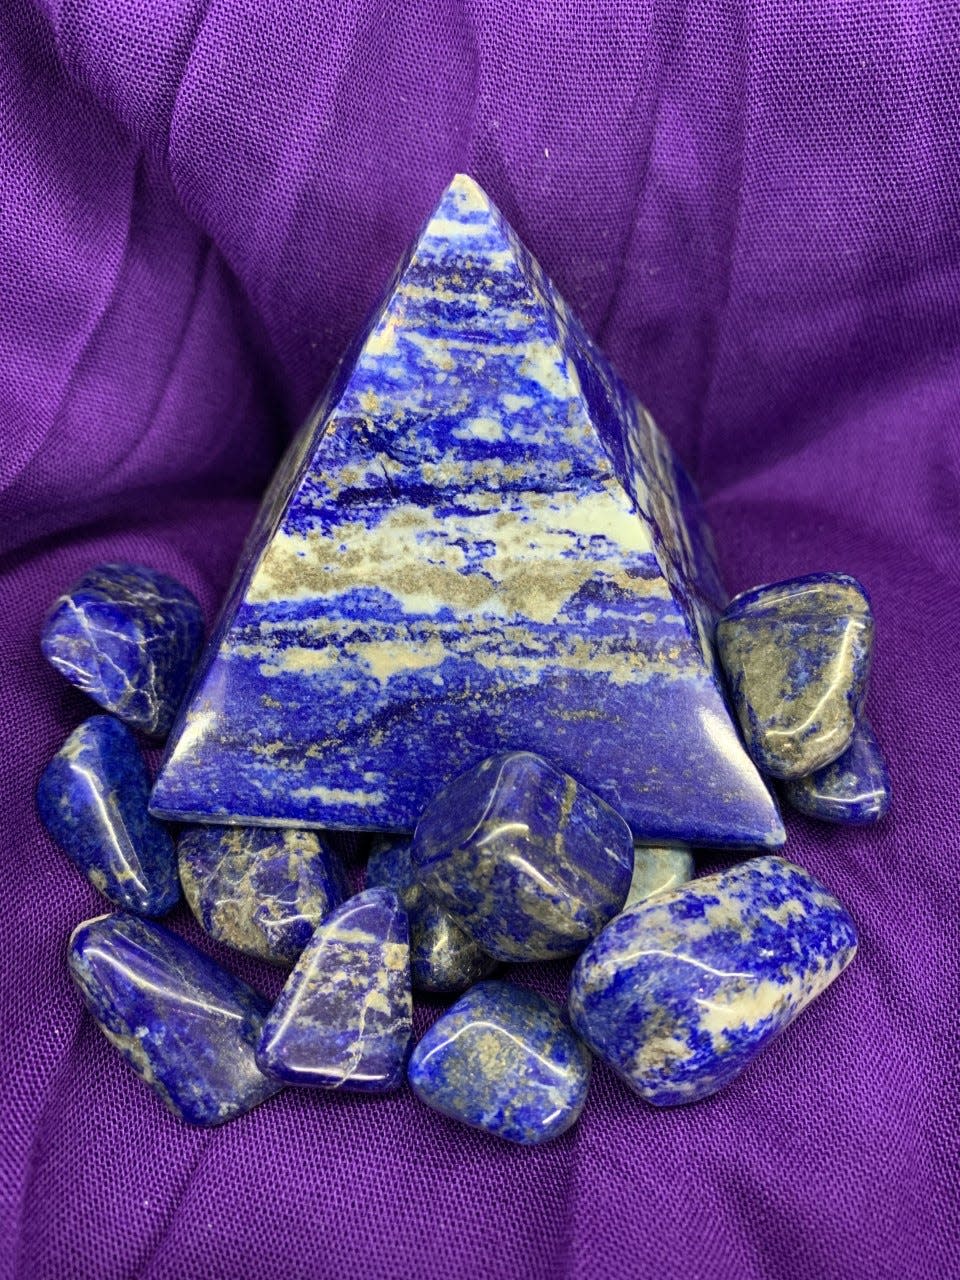 Lapis lazuli pyramid and stones. A center for metaphysical and spiritual study, Mount Shasta is home to crystal shops, some of which also sell singing bowls, musical instruments, jewelry and religious icons.